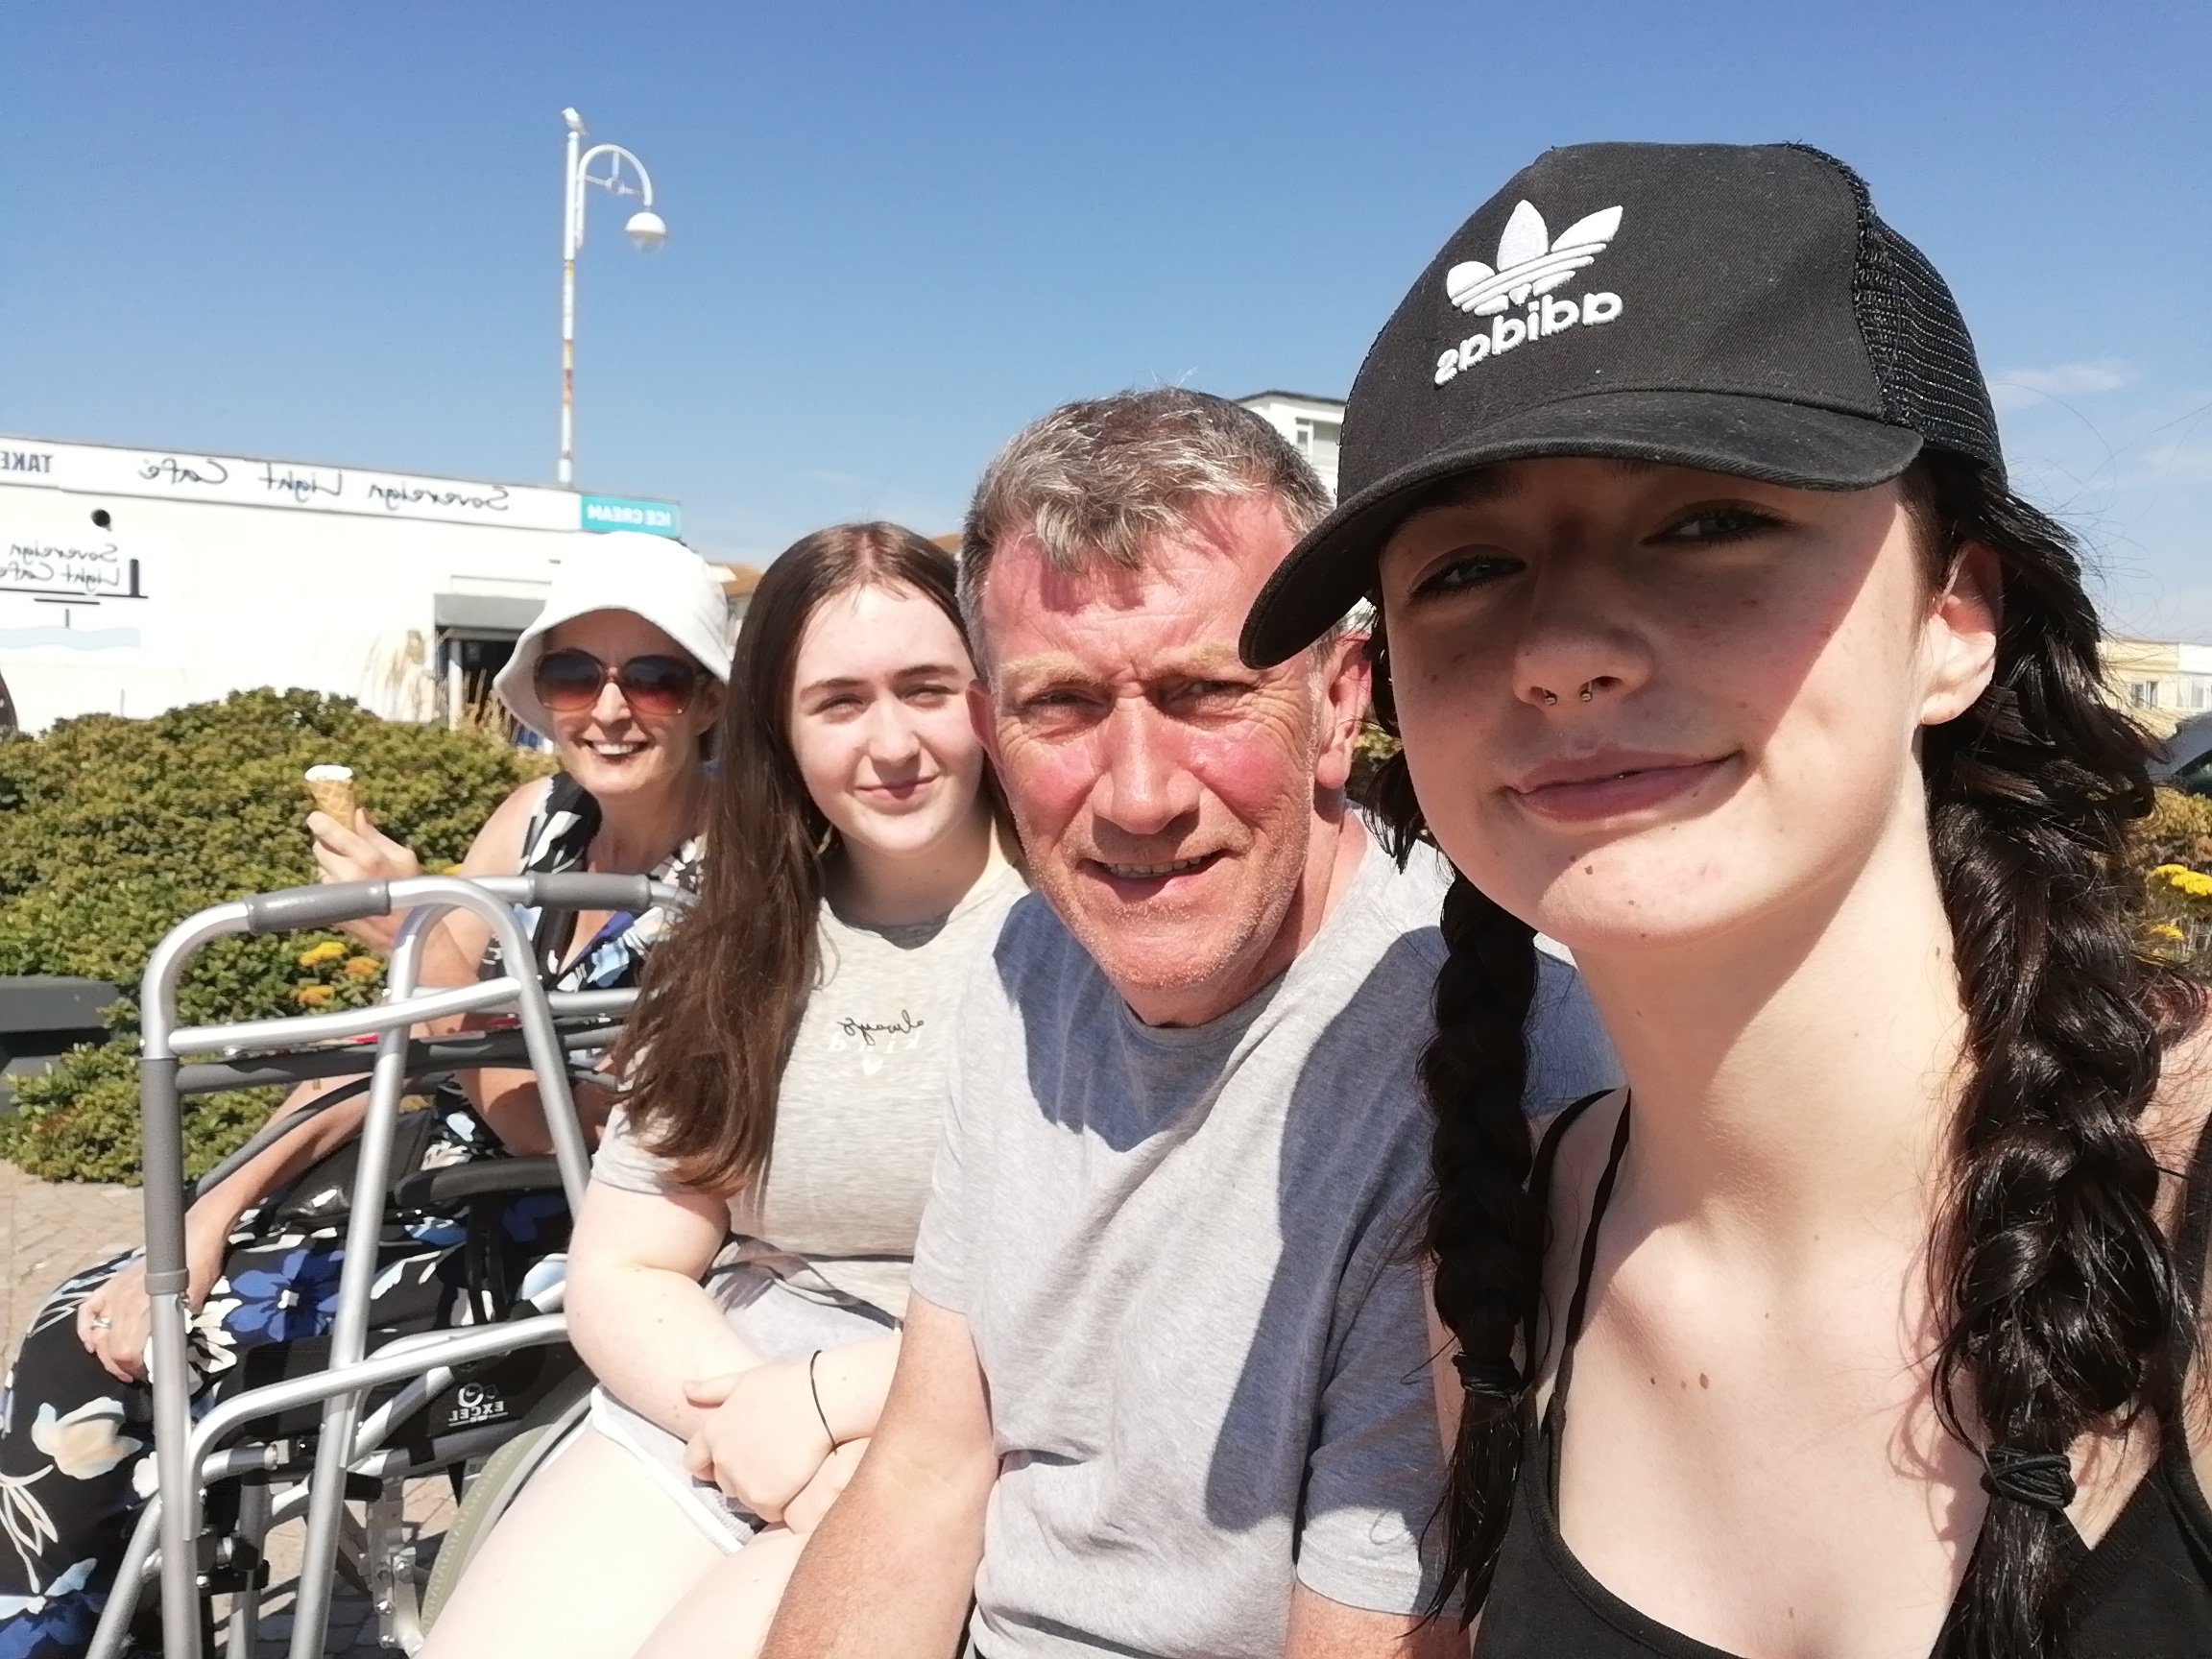 A family on holiday in the sun.